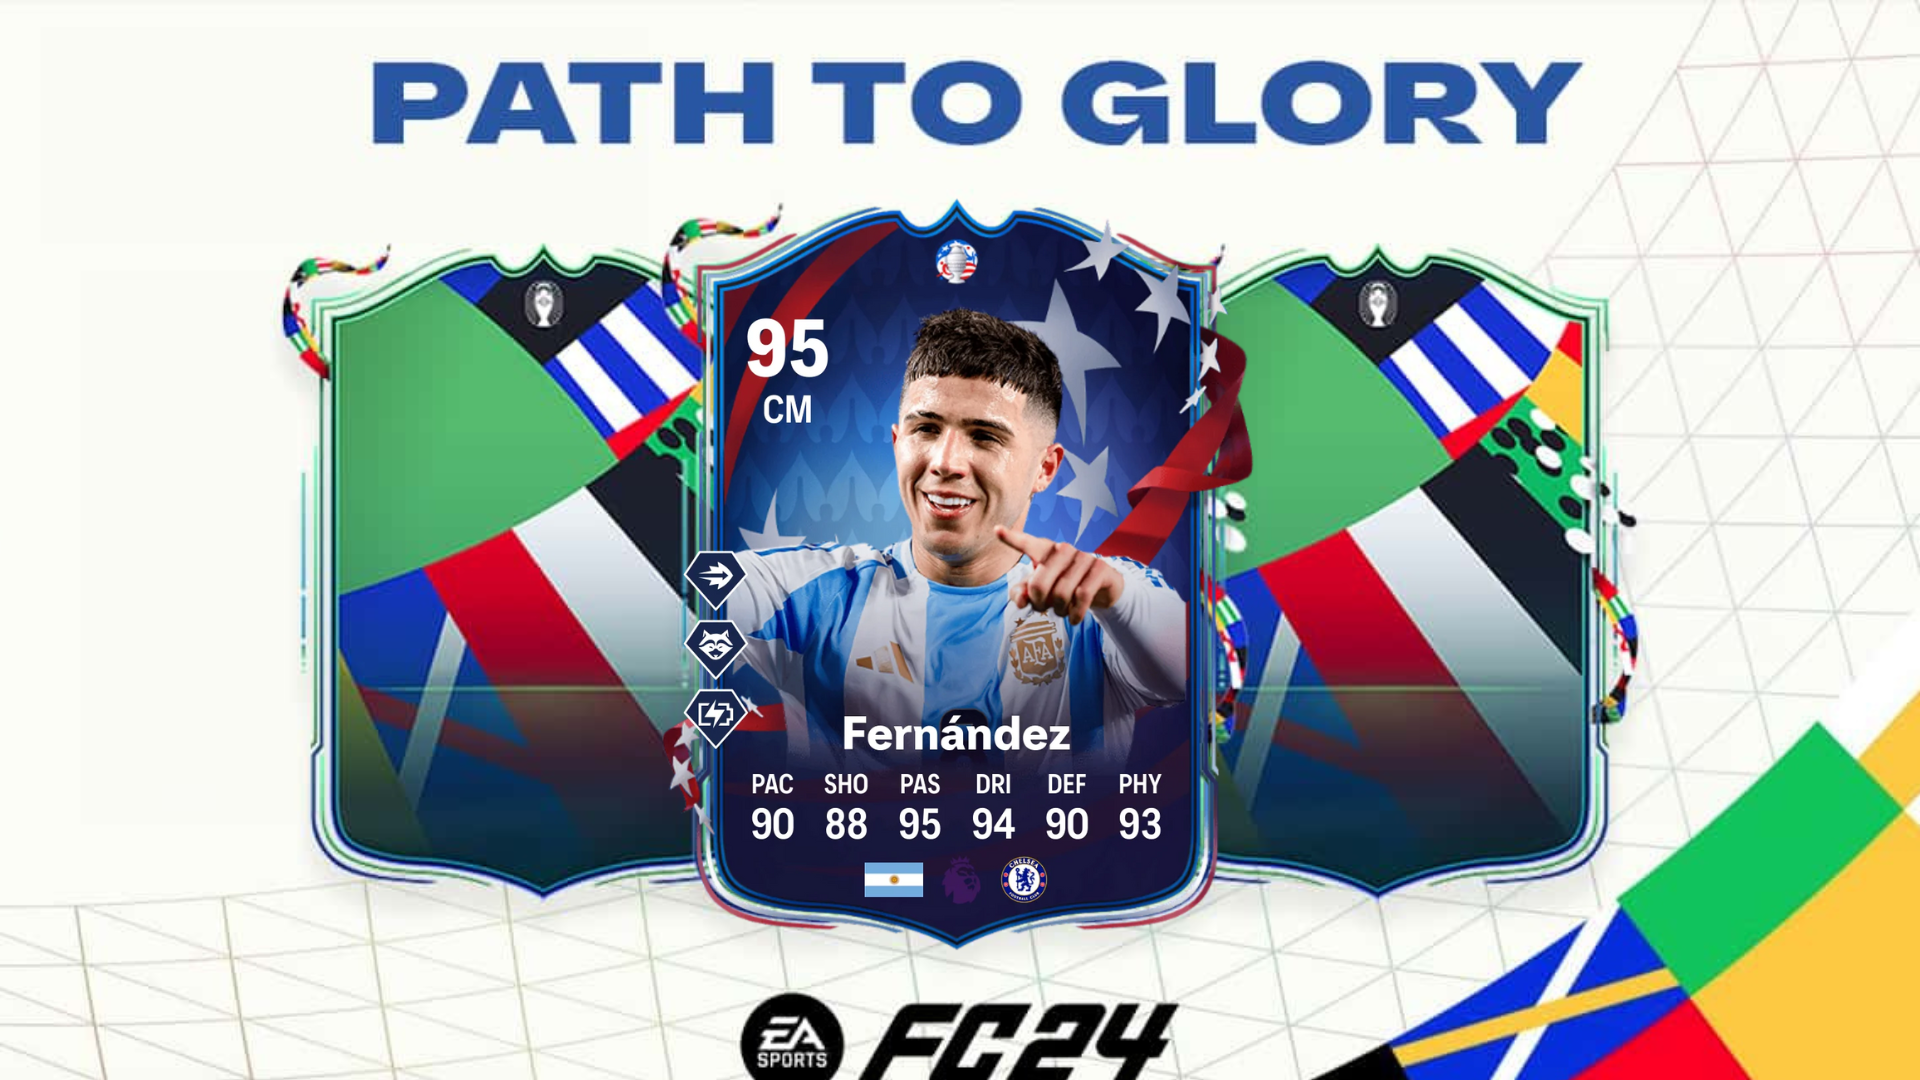 An image of Enzo Fernandez Path to Glory